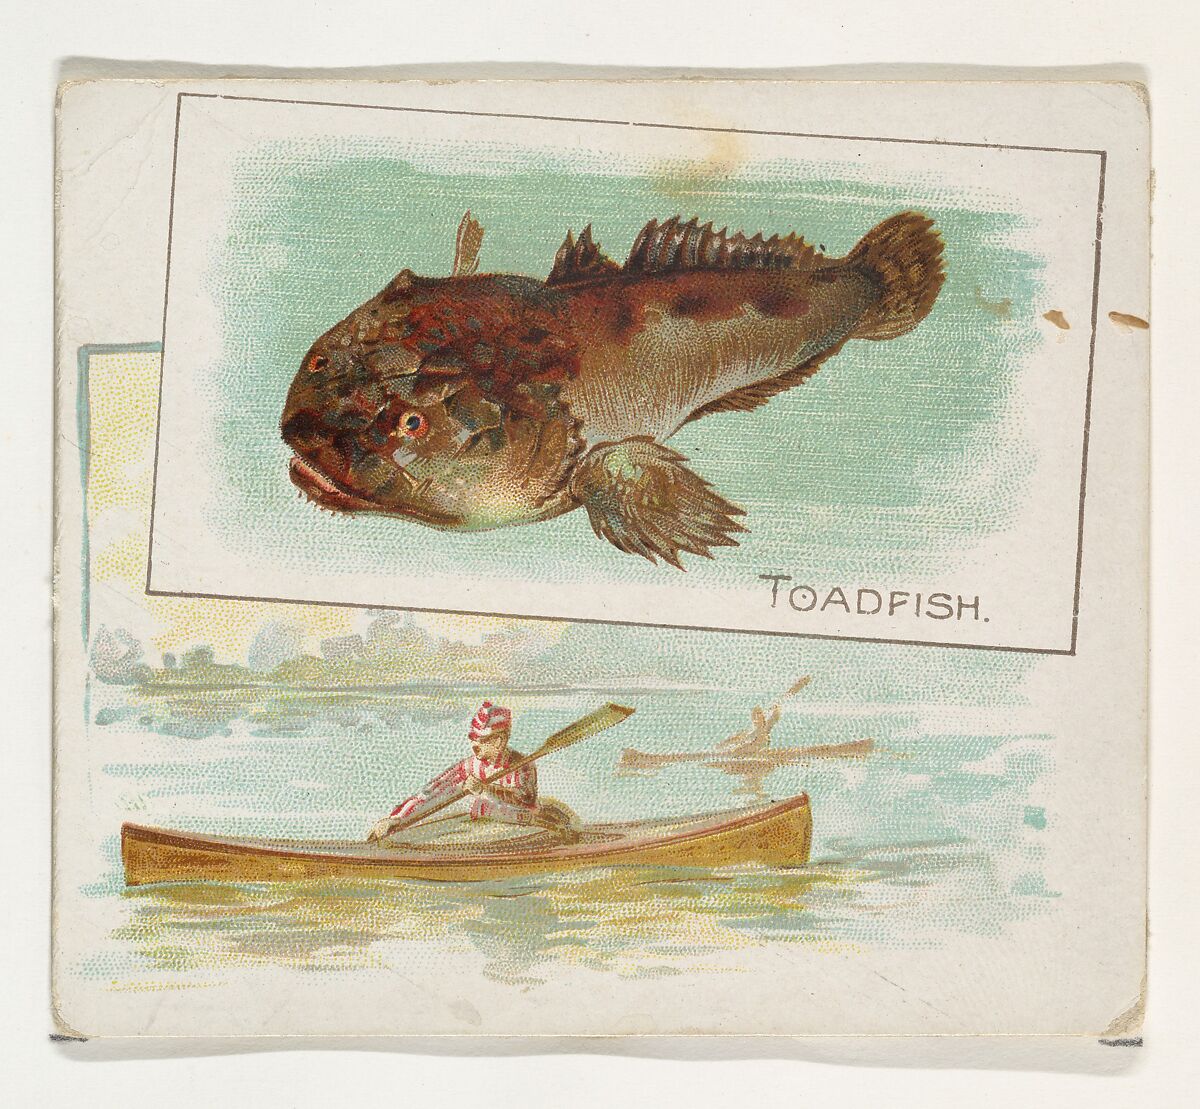 Toadfish, from Fish from American Waters series (N39) for Allen & Ginter Cigarettes, Issued by Allen &amp; Ginter (American, Richmond, Virginia), Commercial color lithograph 